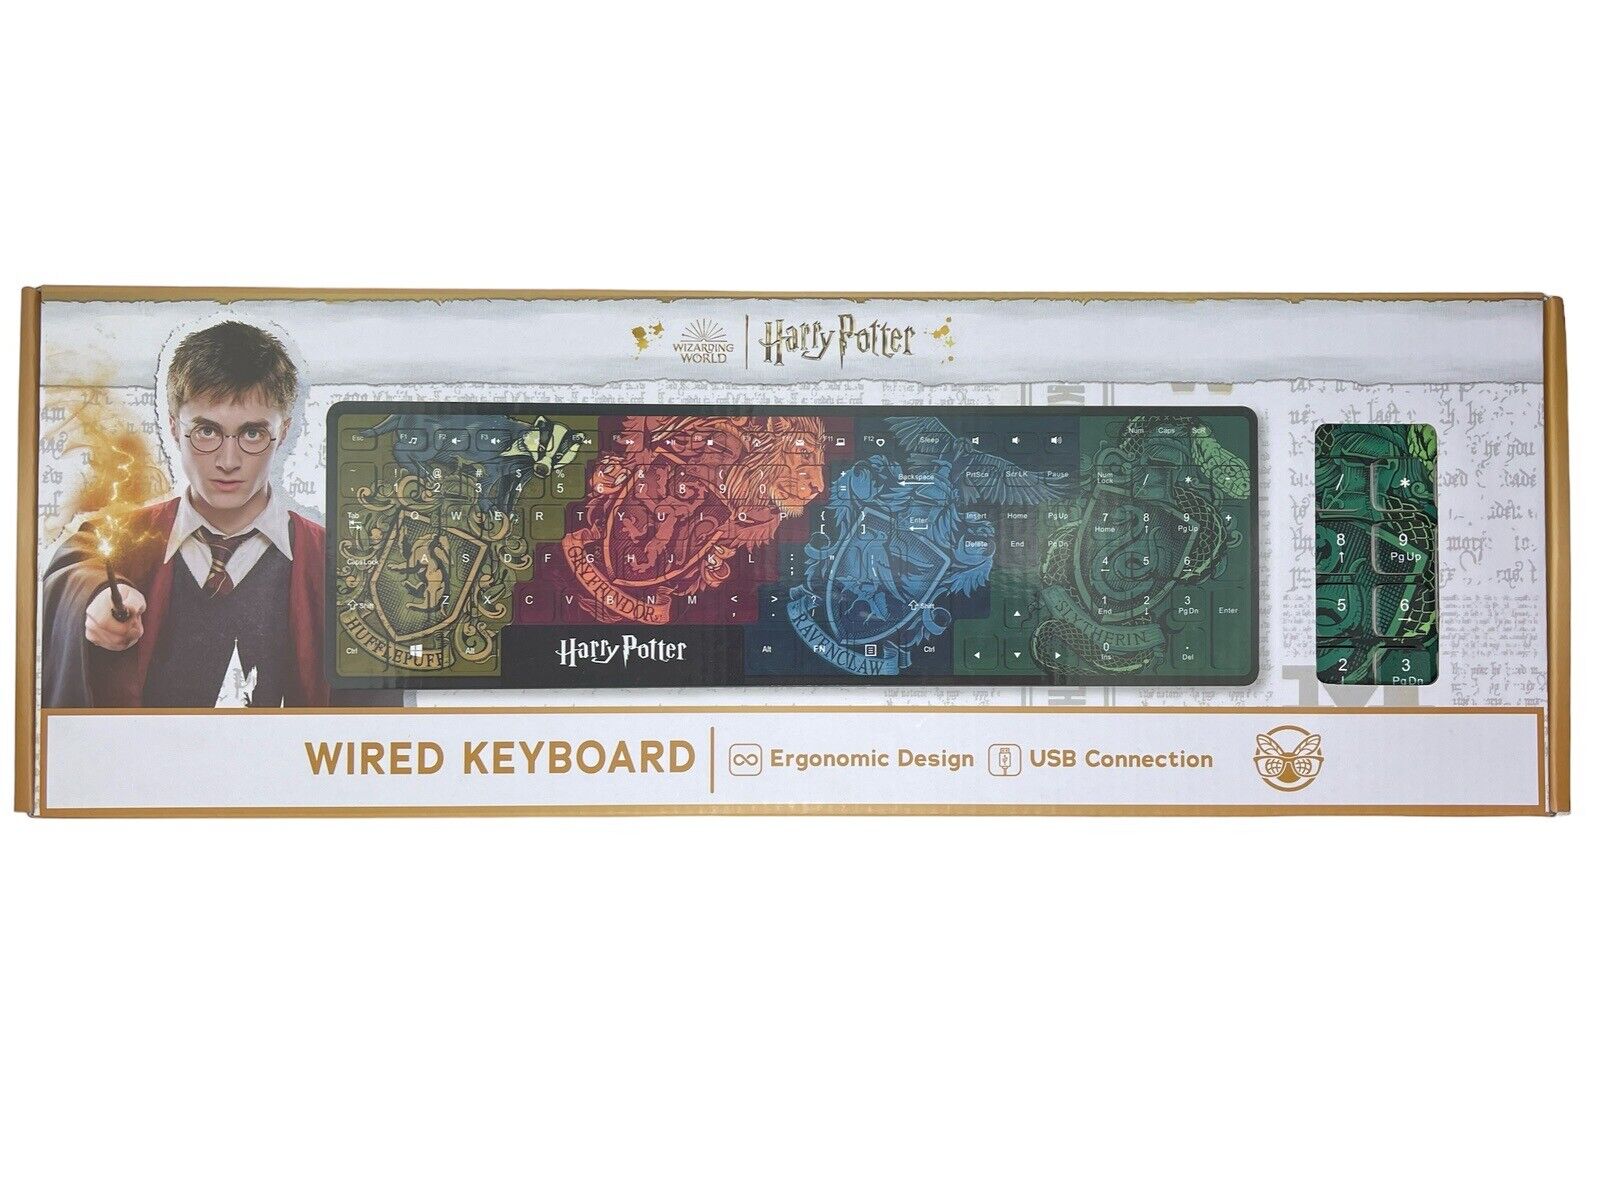 Harry Potter Wired Computer Keyboard Ergonomic Design USB Connection OPEN BOX